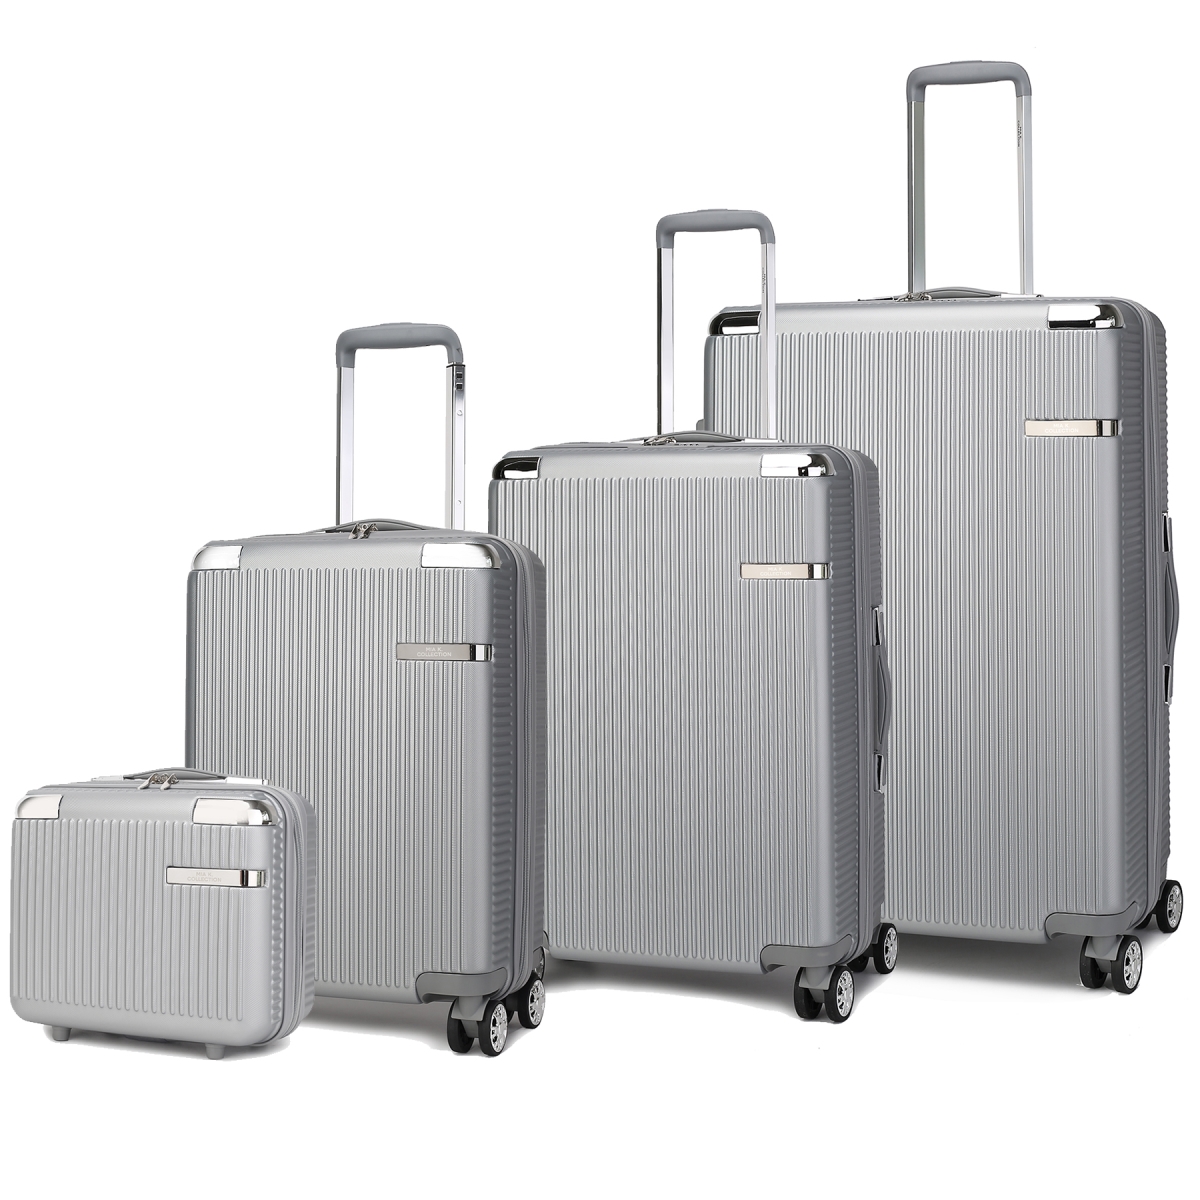 Picture of MKF Collection by Mia K. MKF-HR100SL-4 Tulum Luggage Set, Silver - 4 Piece